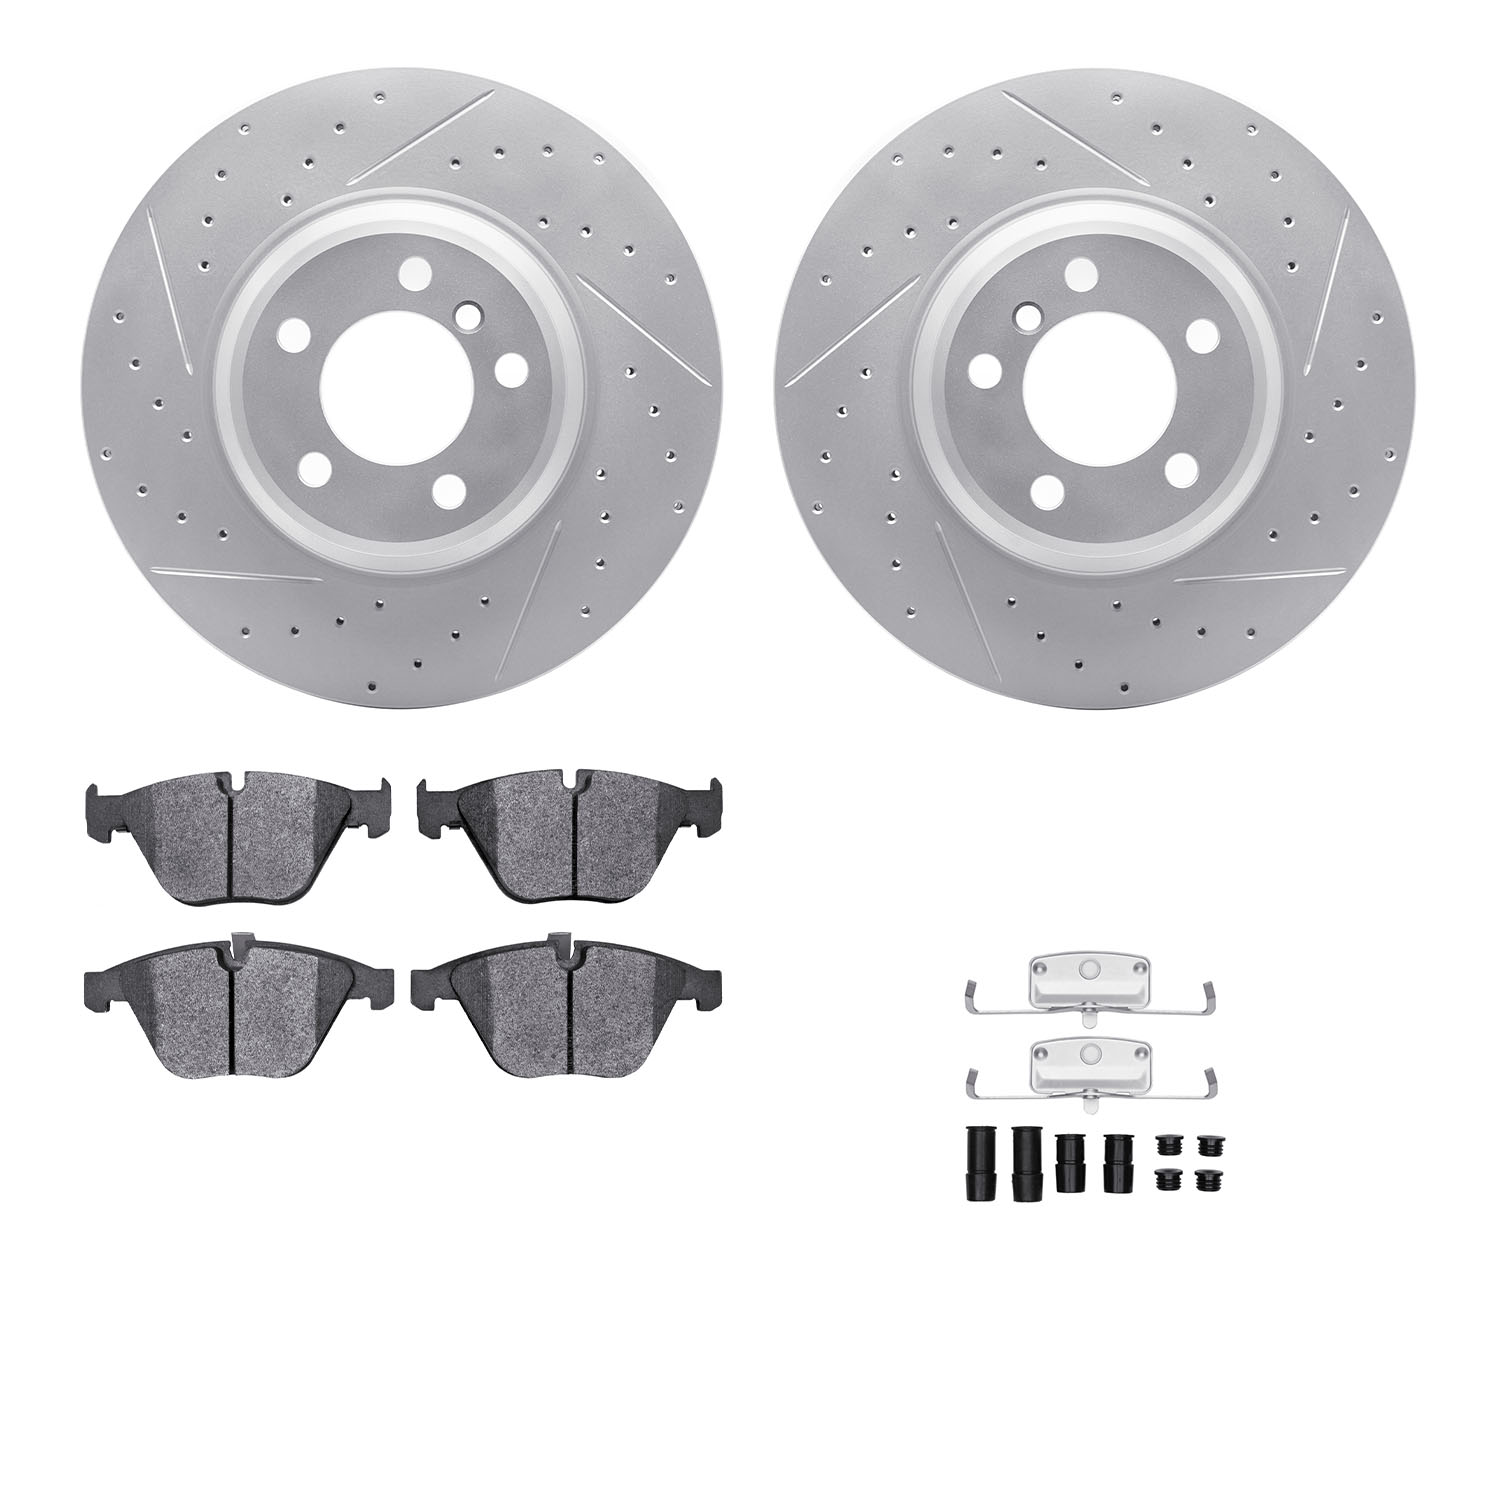 2512-31231 Geoperformance Drilled/Slotted Rotors w/5000 Advanced Brake Pads Kit & Hardware, 2002-2008 BMW, Position: Front